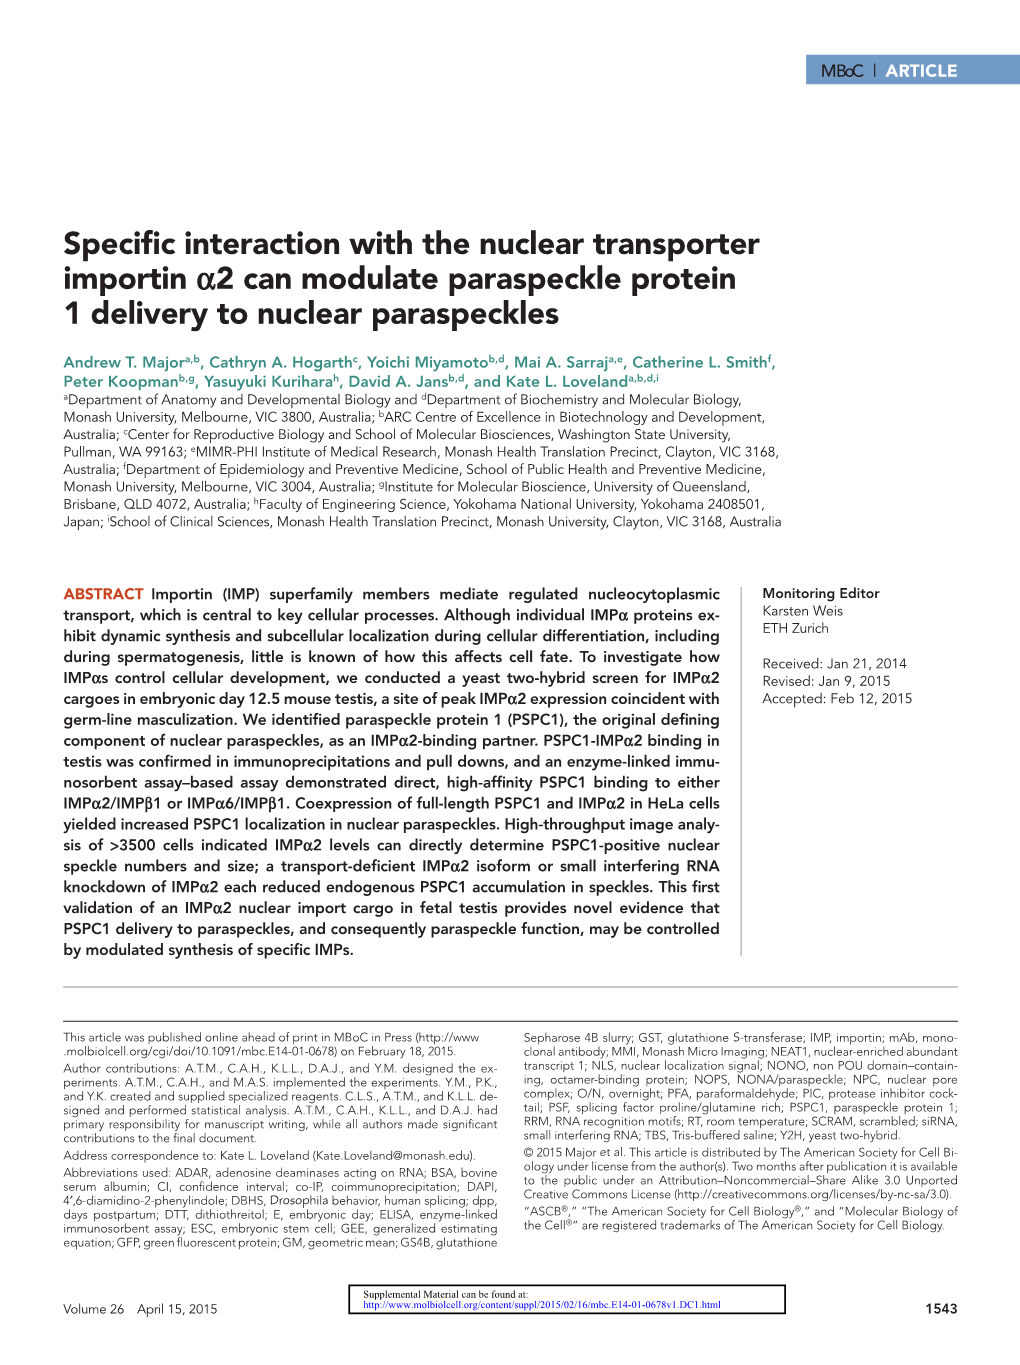 Specific Interaction with the Nuclear Transporter Importin Α2 Can Modulate Paraspeckle Protein 1 Delivery to Nuclear Paraspeckles